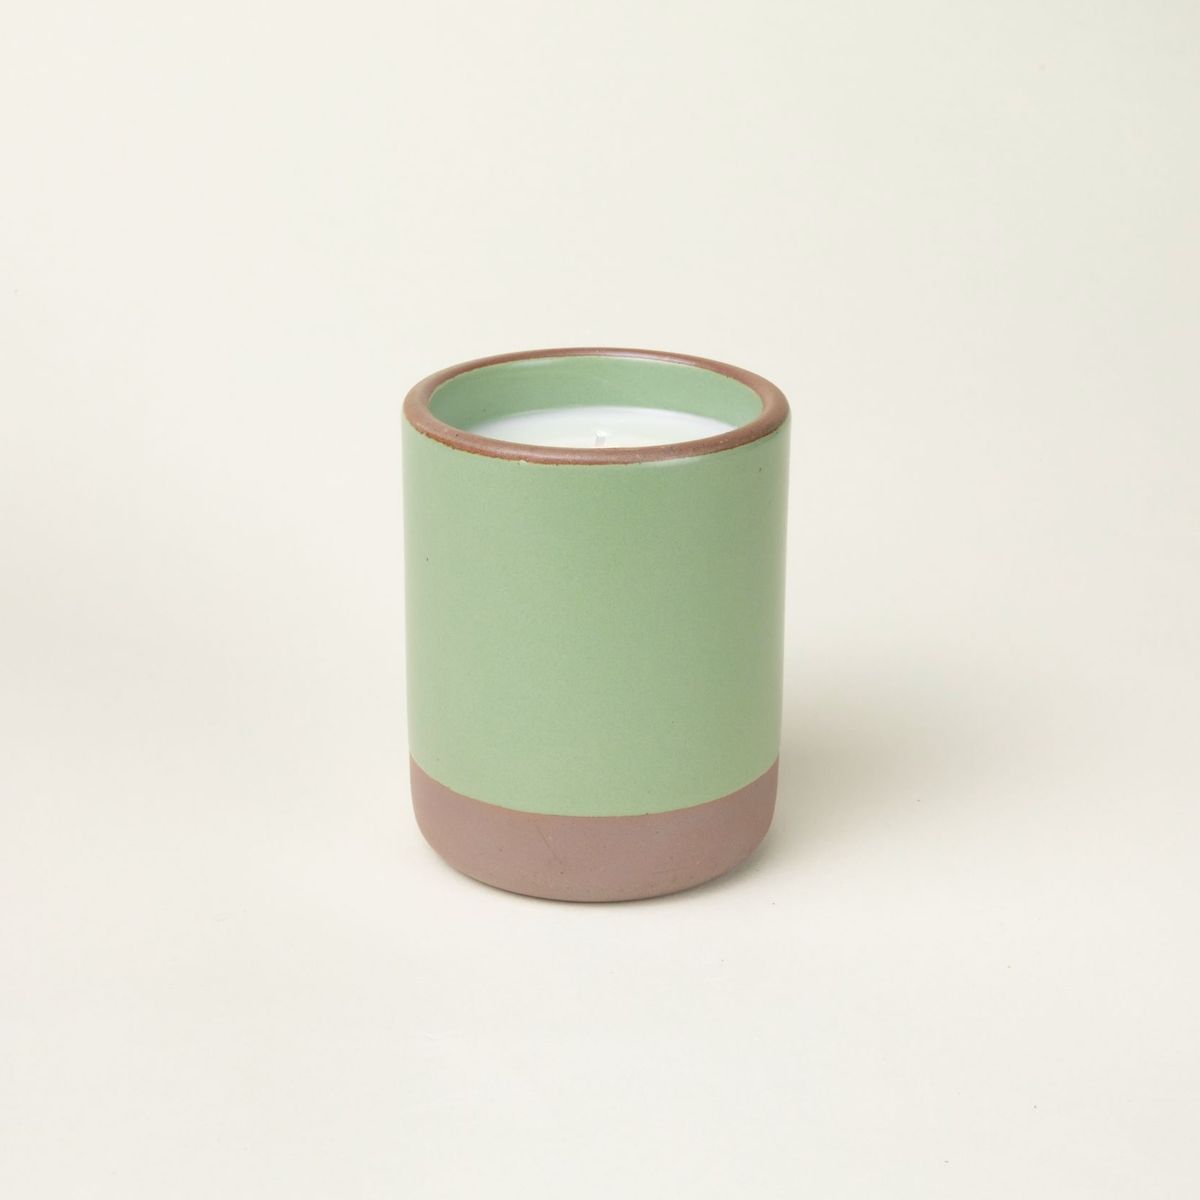 A candle in a large ceramic vessel dipped in a sage green color.